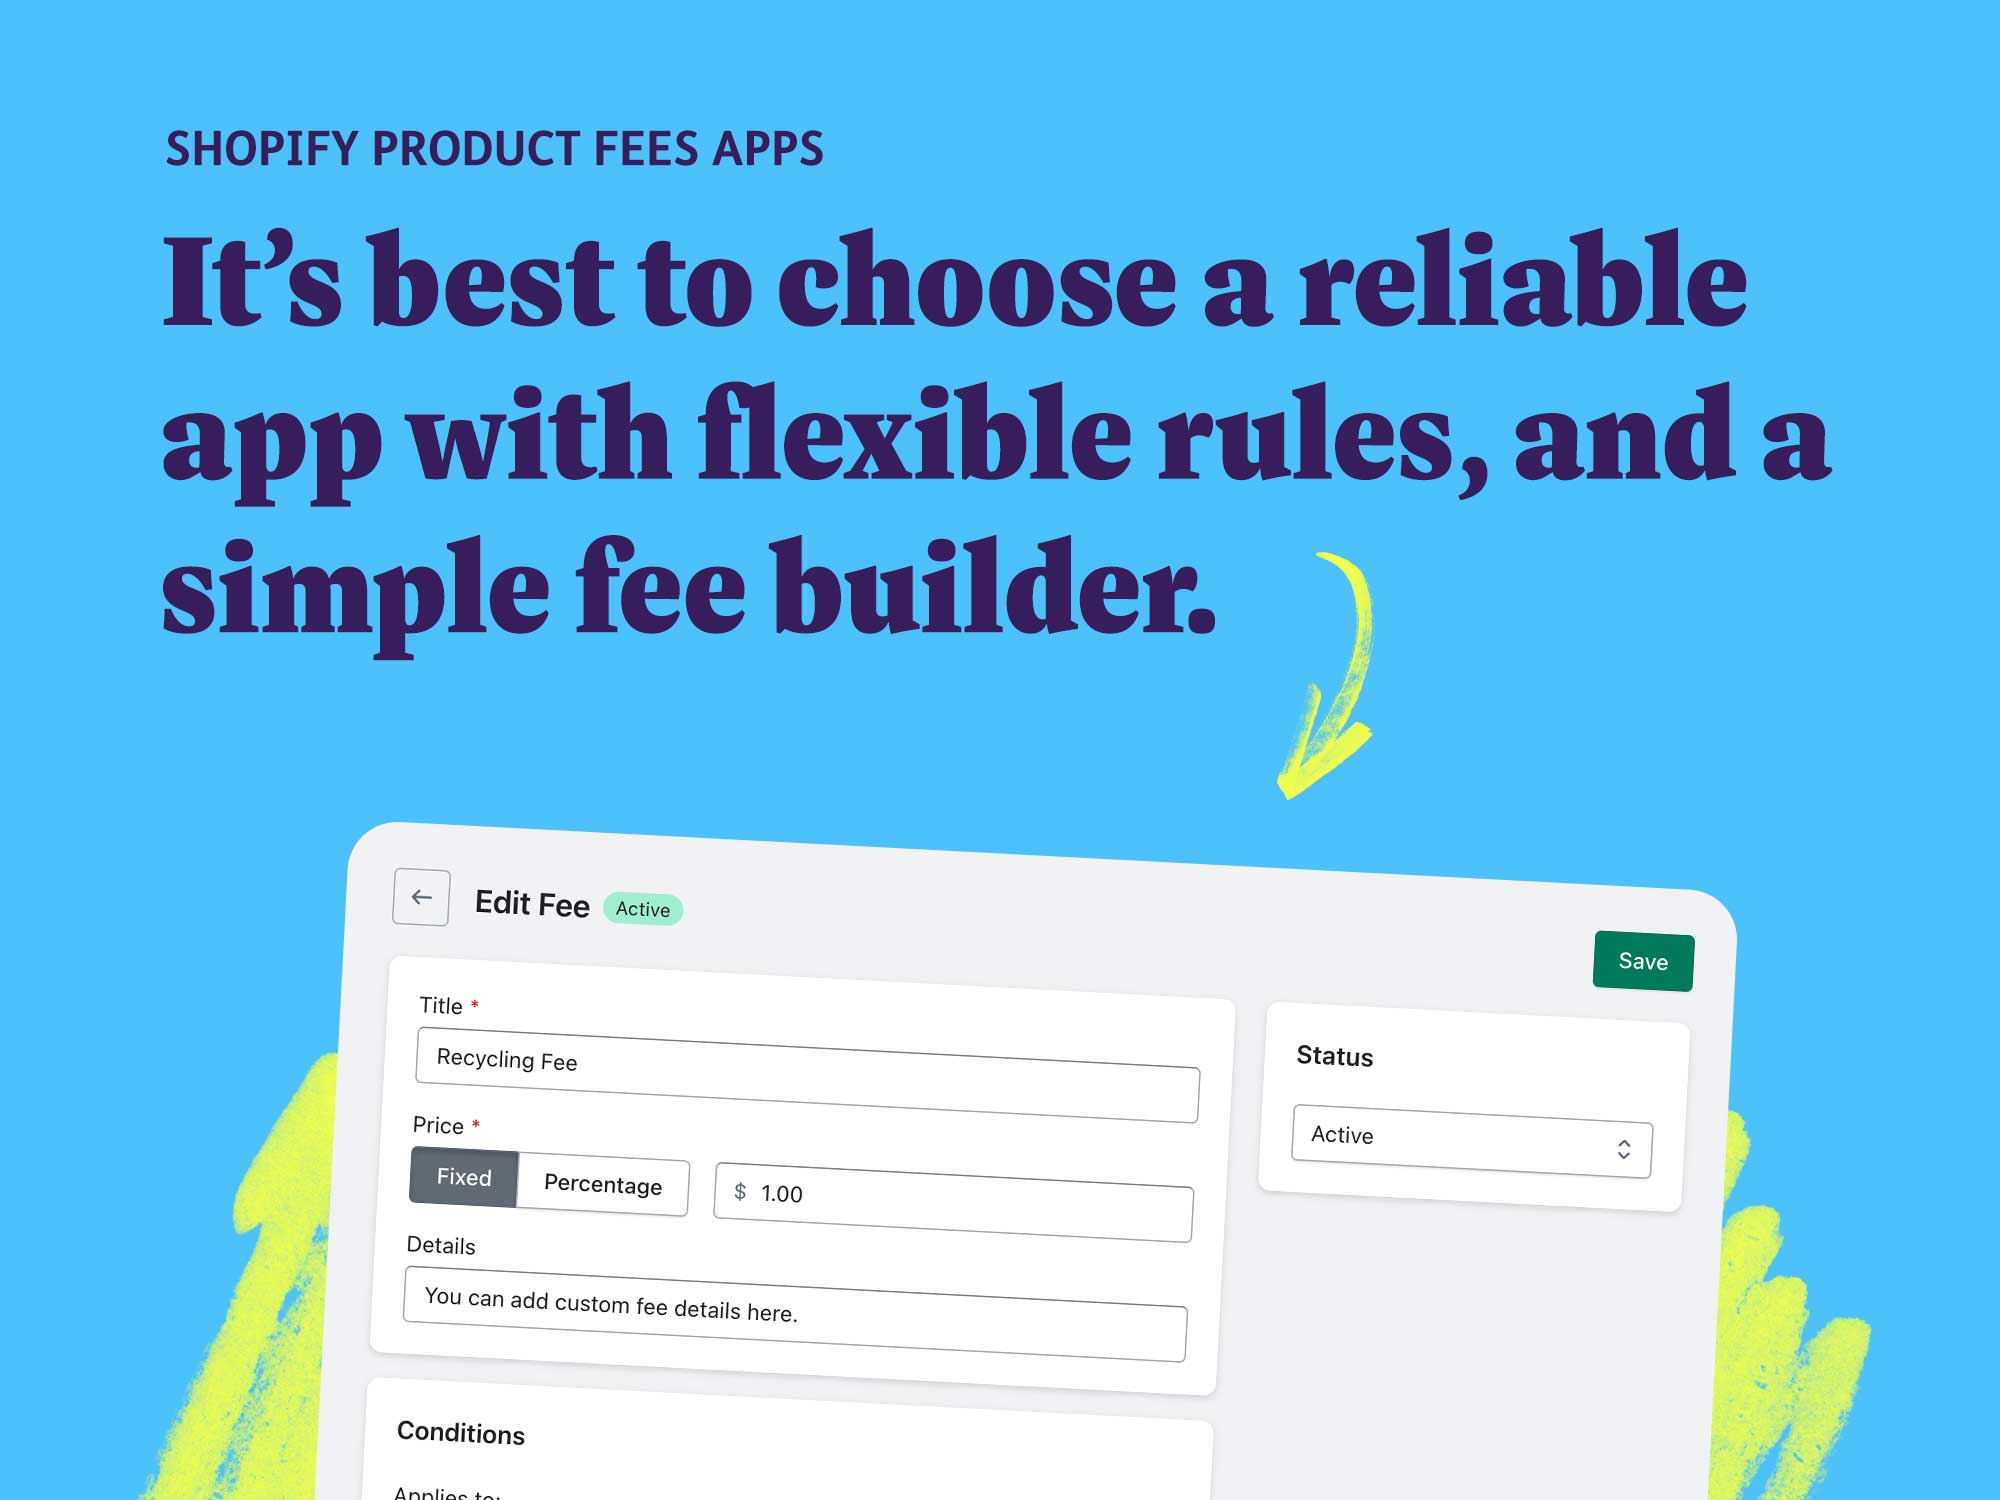 It’s best to choose a reliable app with flexible rules, and a simple fee builder.